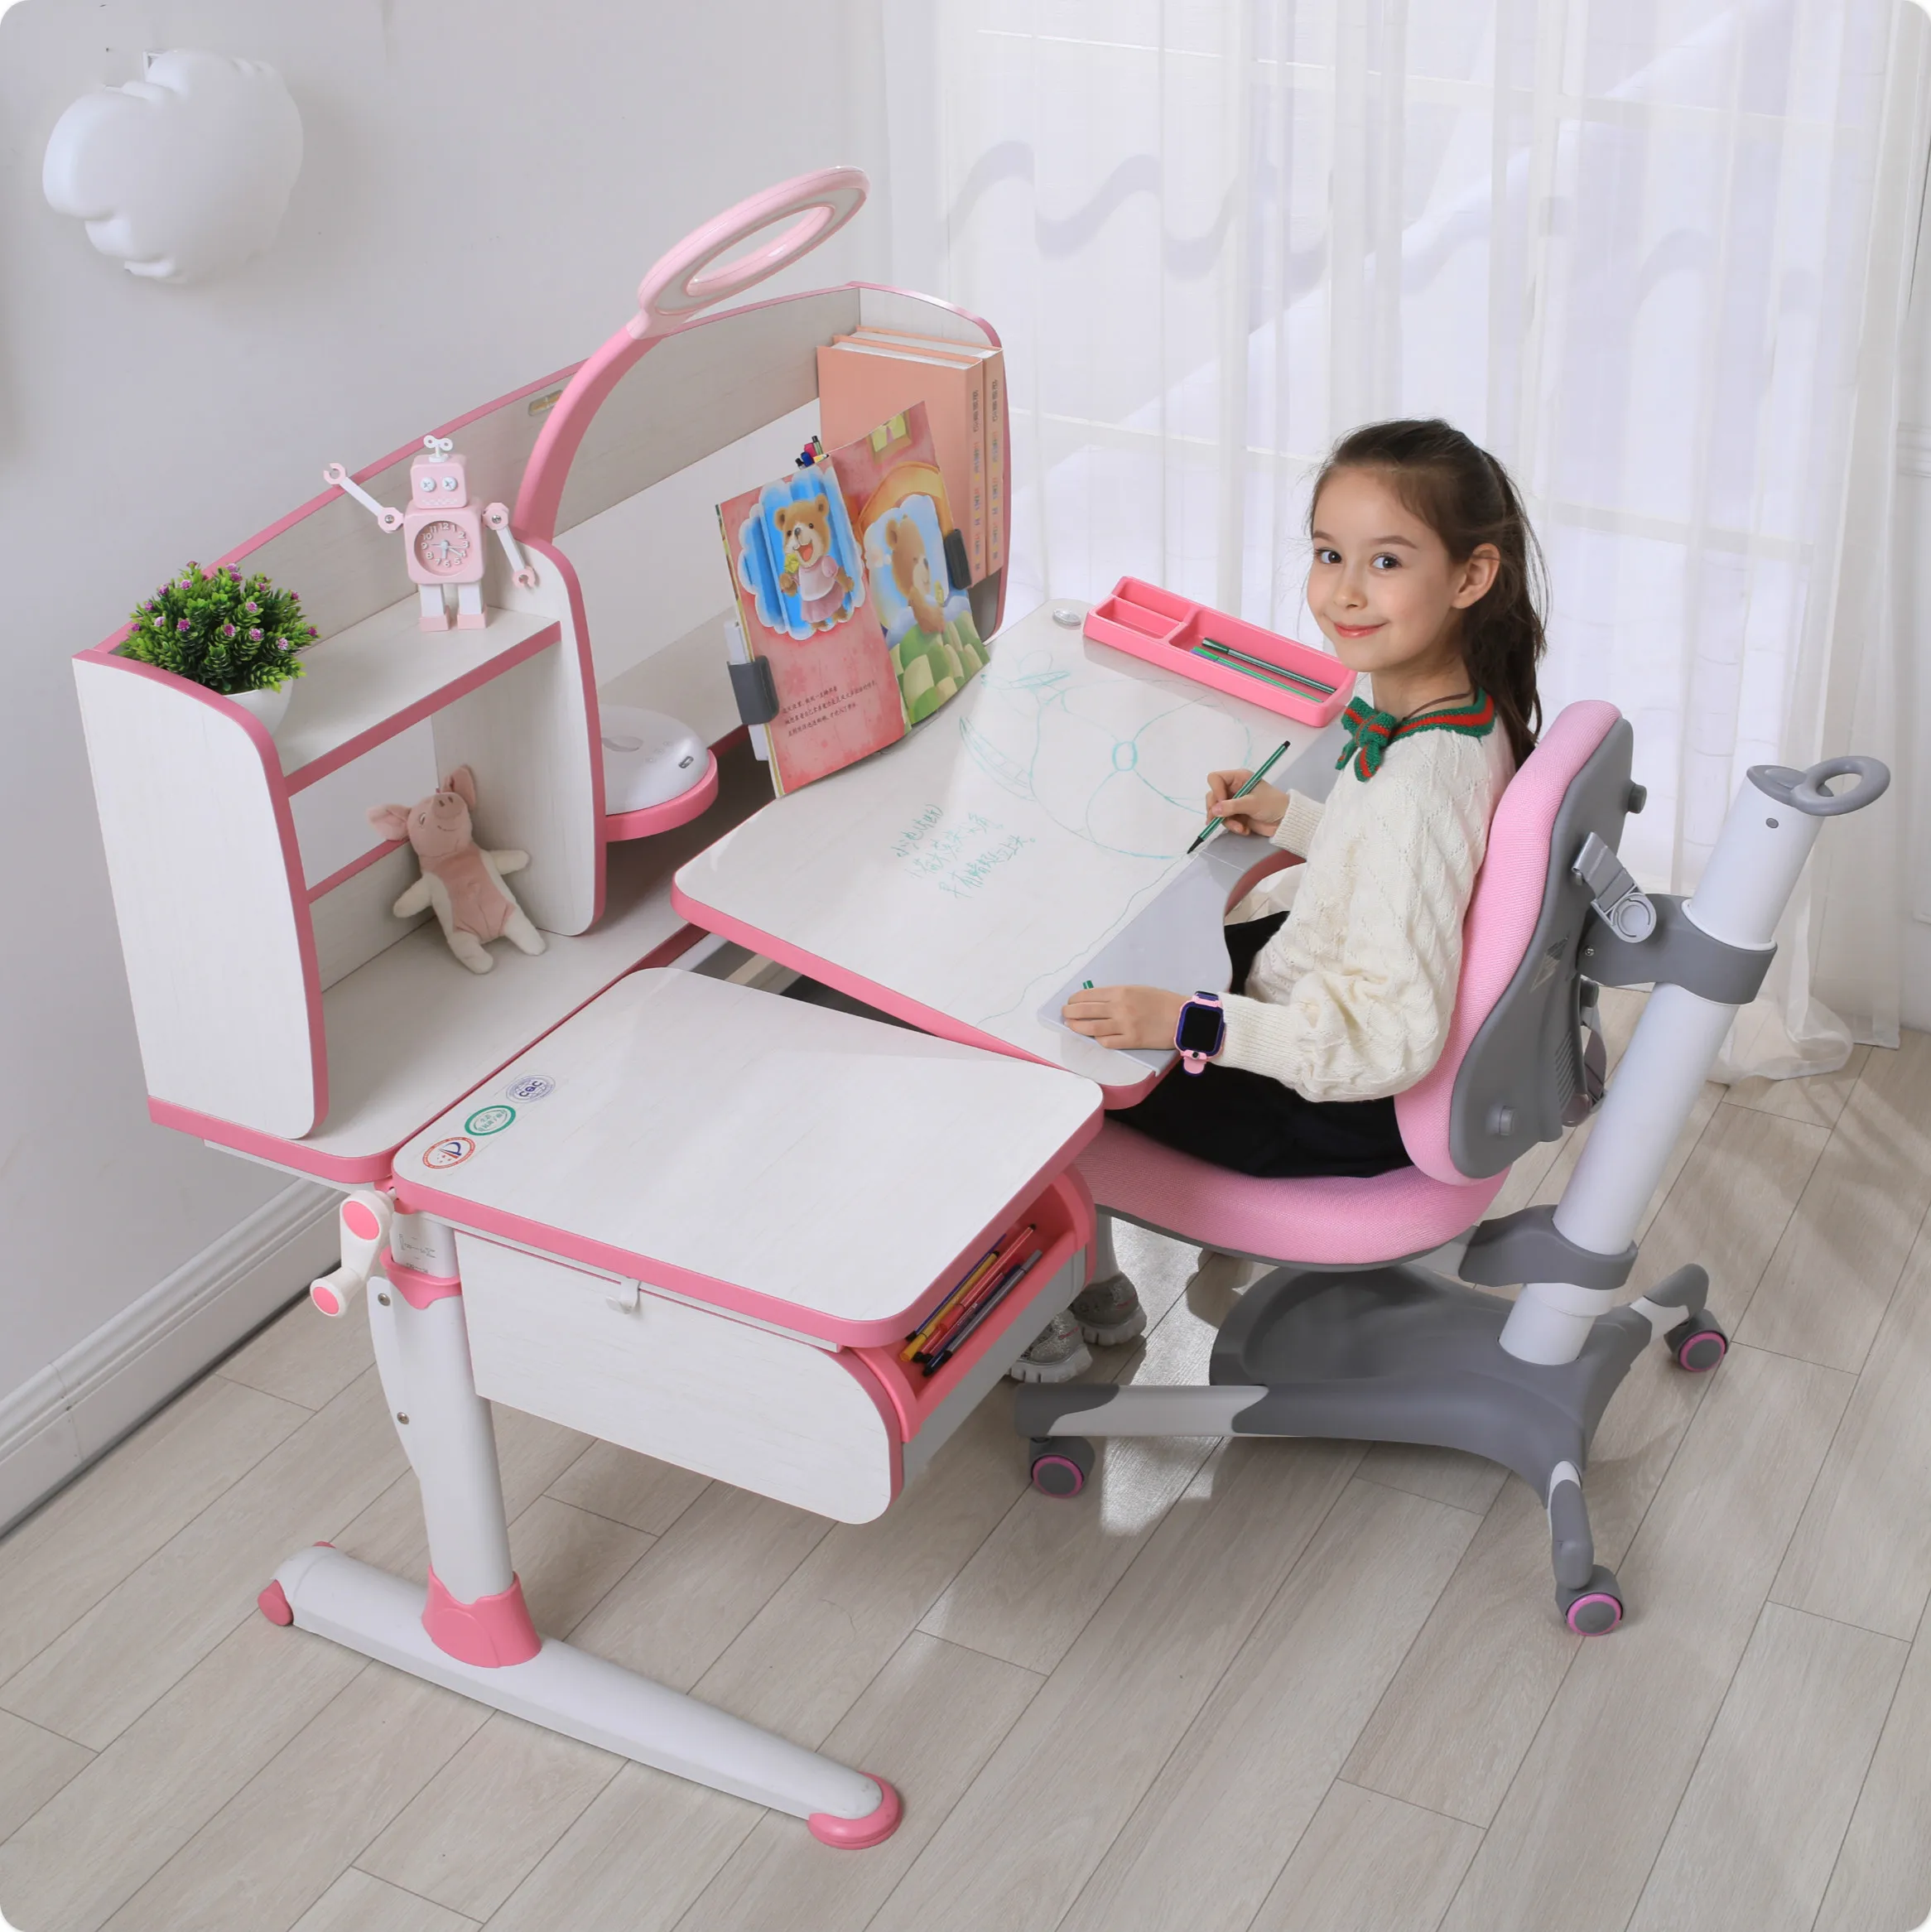 
Kid Srite Learning Desk And Chair For Children School Student Reading Writing Adjustable Drawing Table 